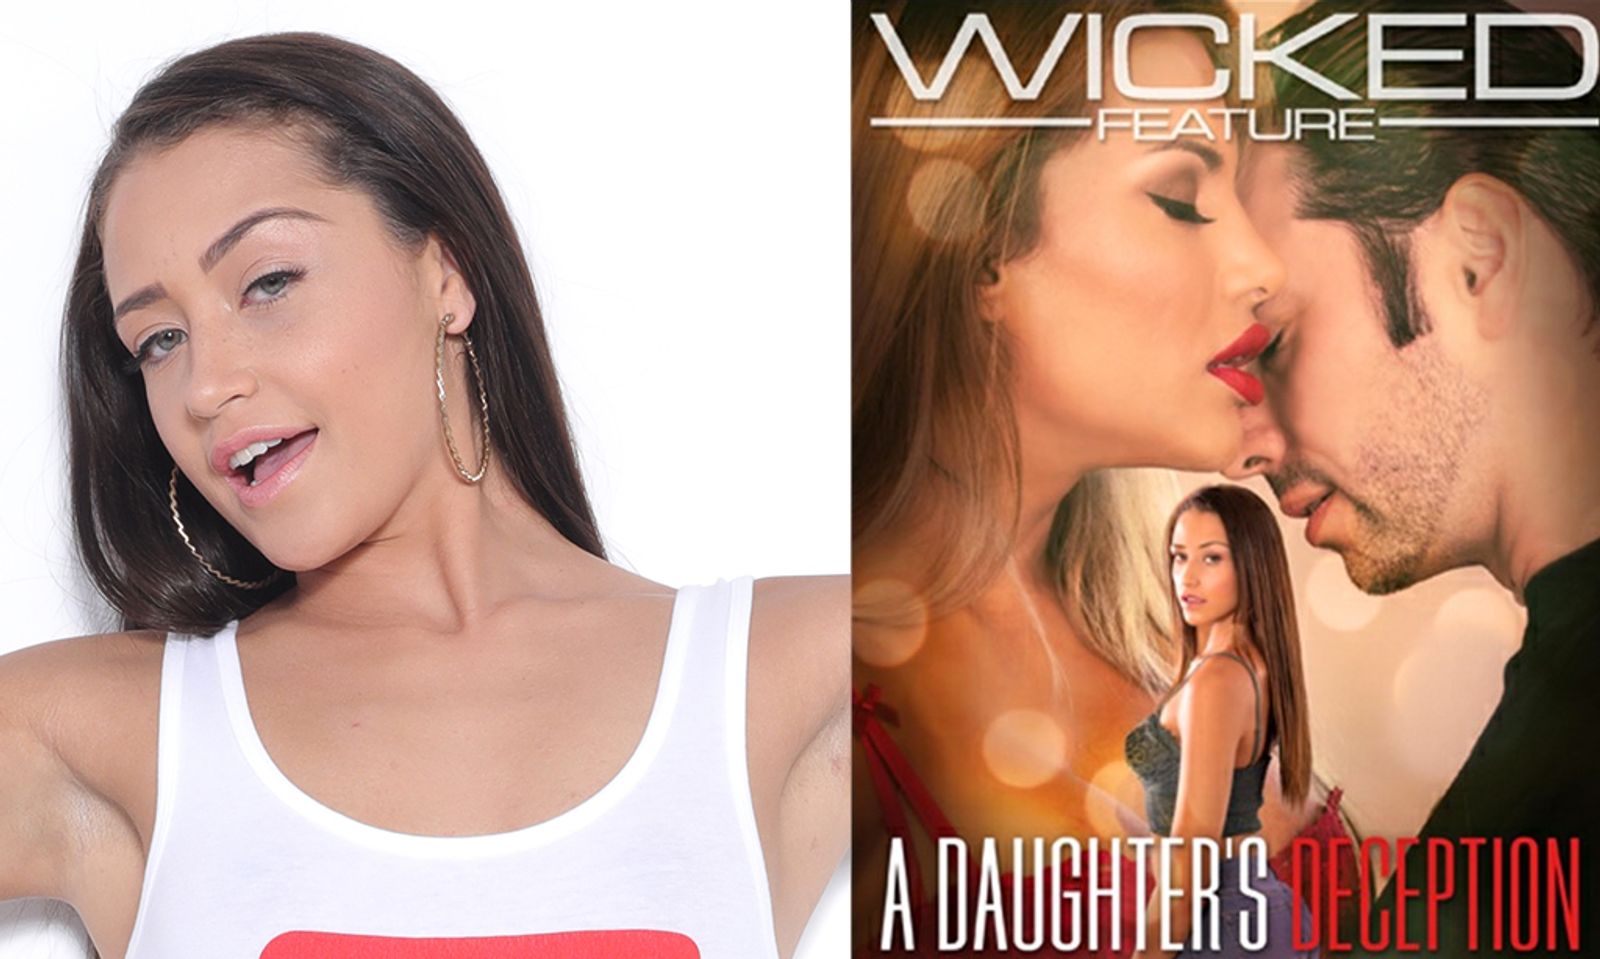 Avi Love Acts Out in Wicked Feature 'A Daughter's Deception'